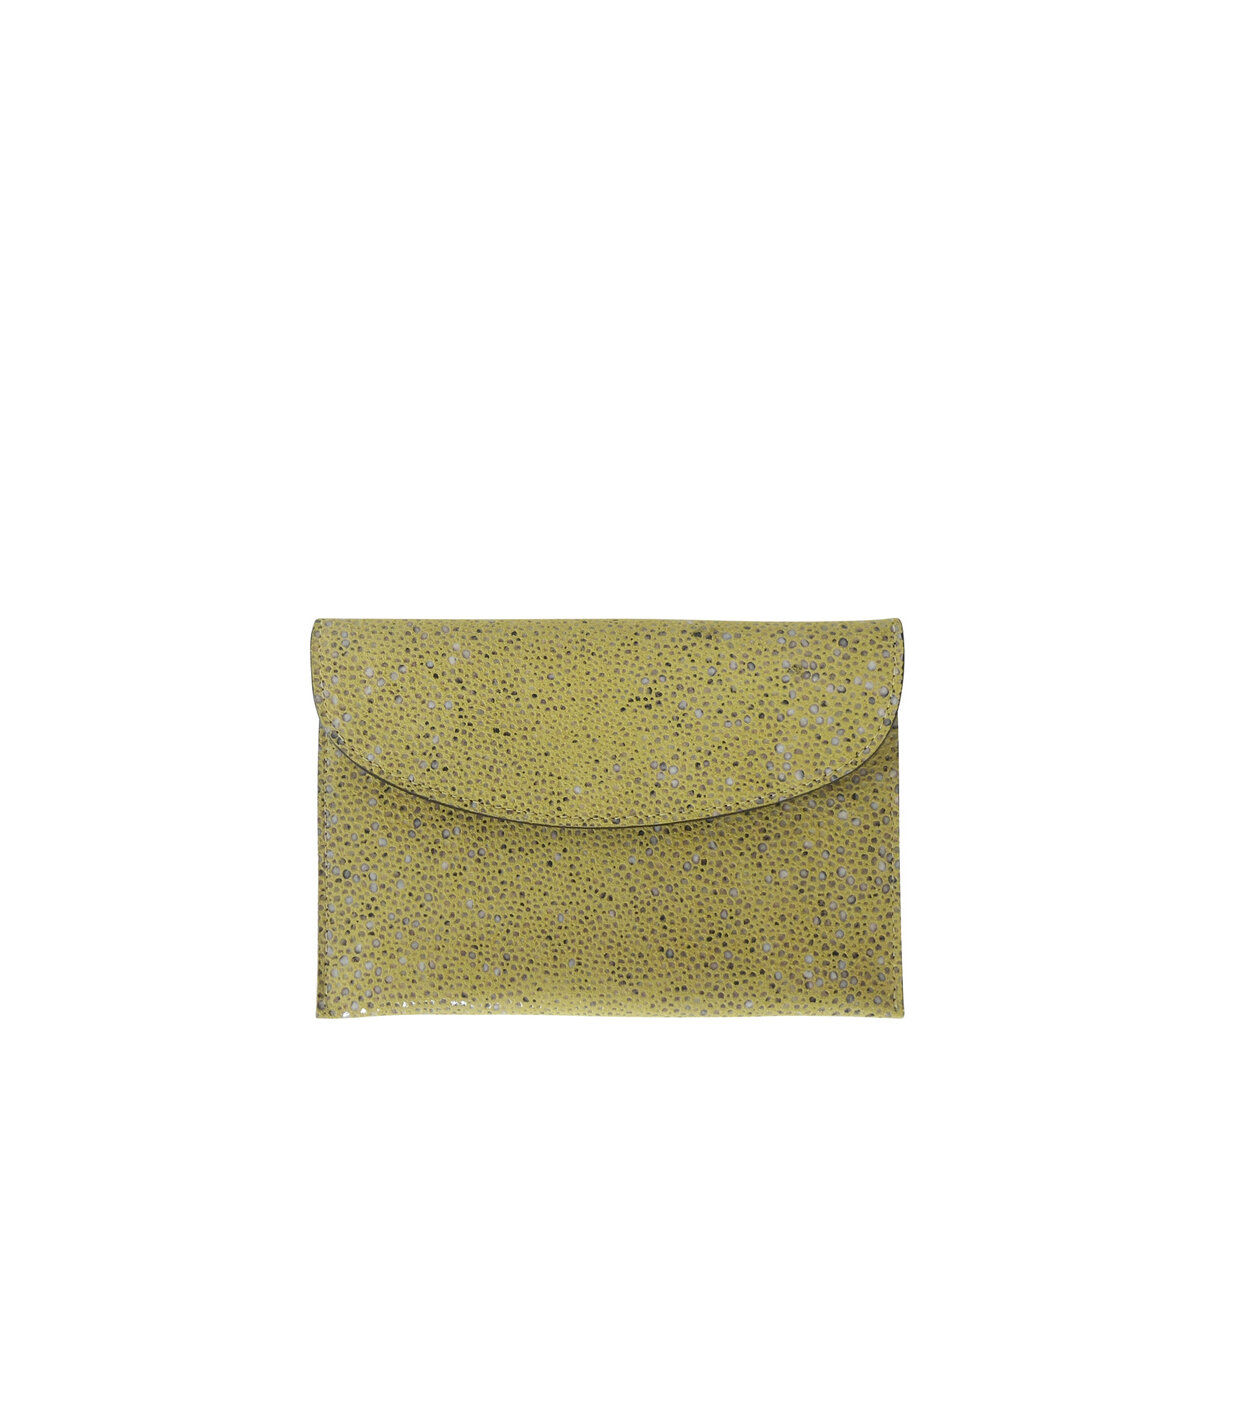 CARRÉ D'OR S - GALUCHAT, PRINTED SUEDE - Lime — Linde Gallery St-Barth